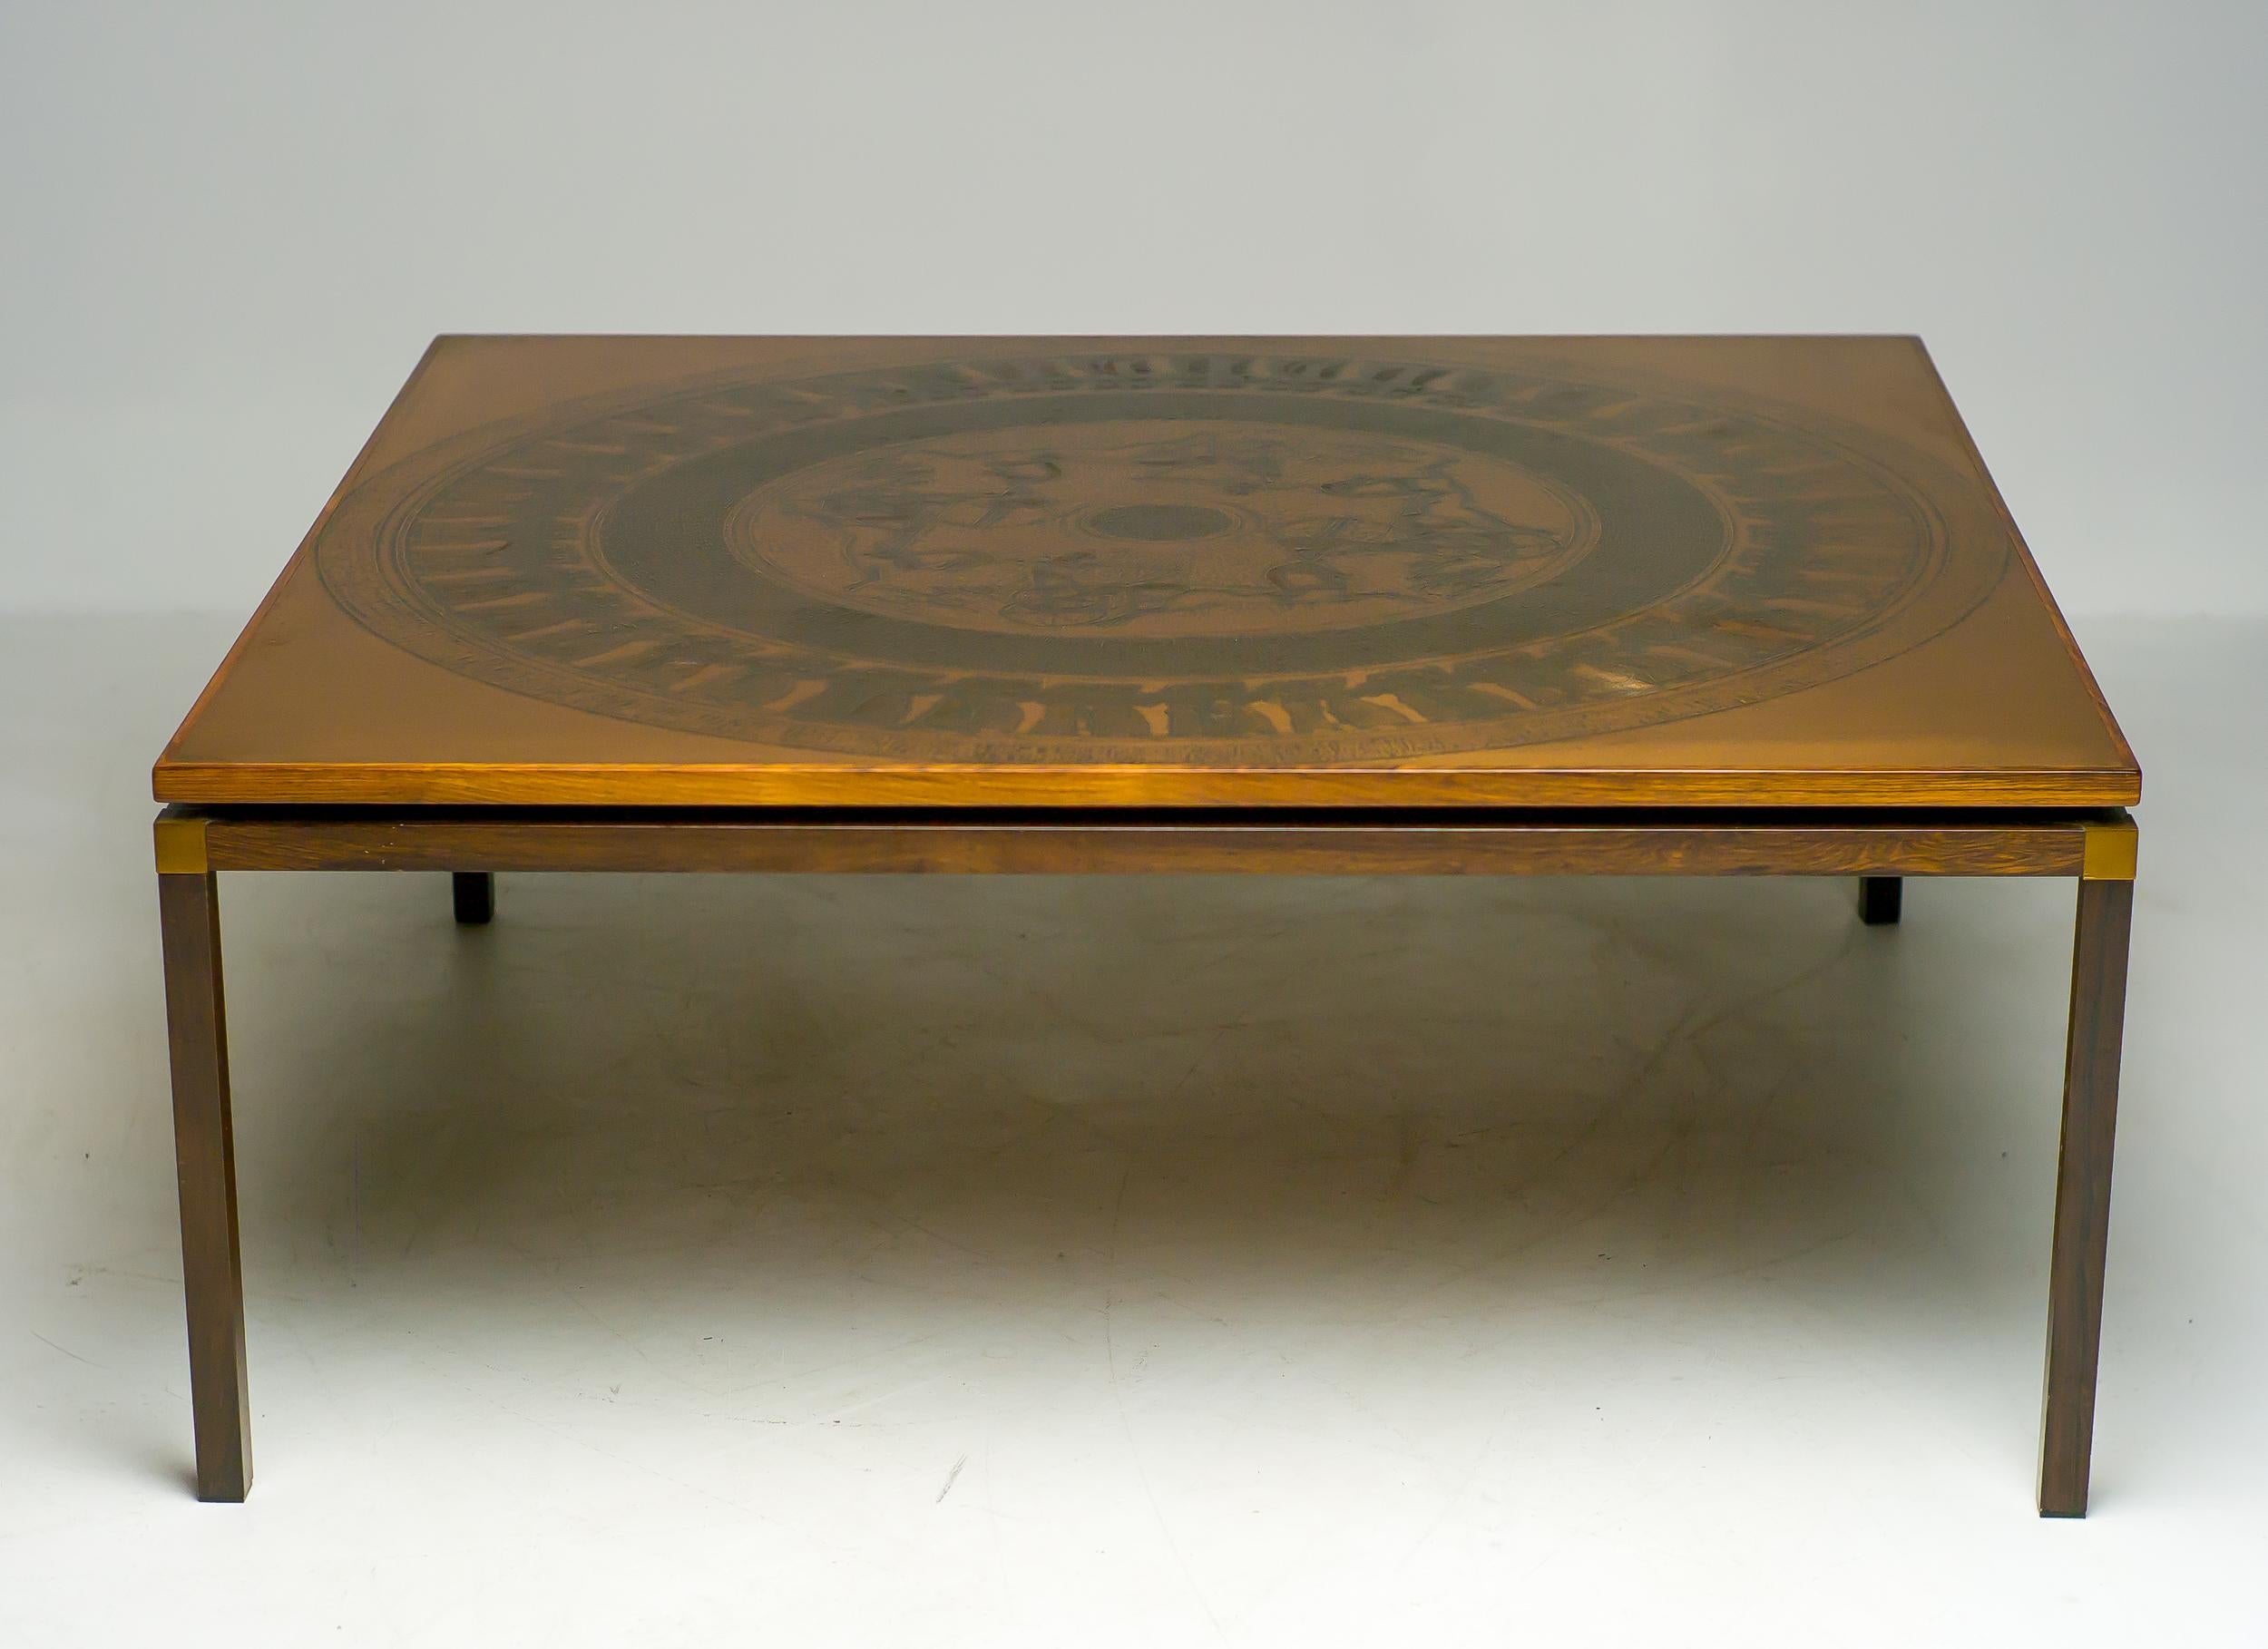 'Circus Maximus' Copper Coffee Table In Good Condition For Sale In Dronten, NL